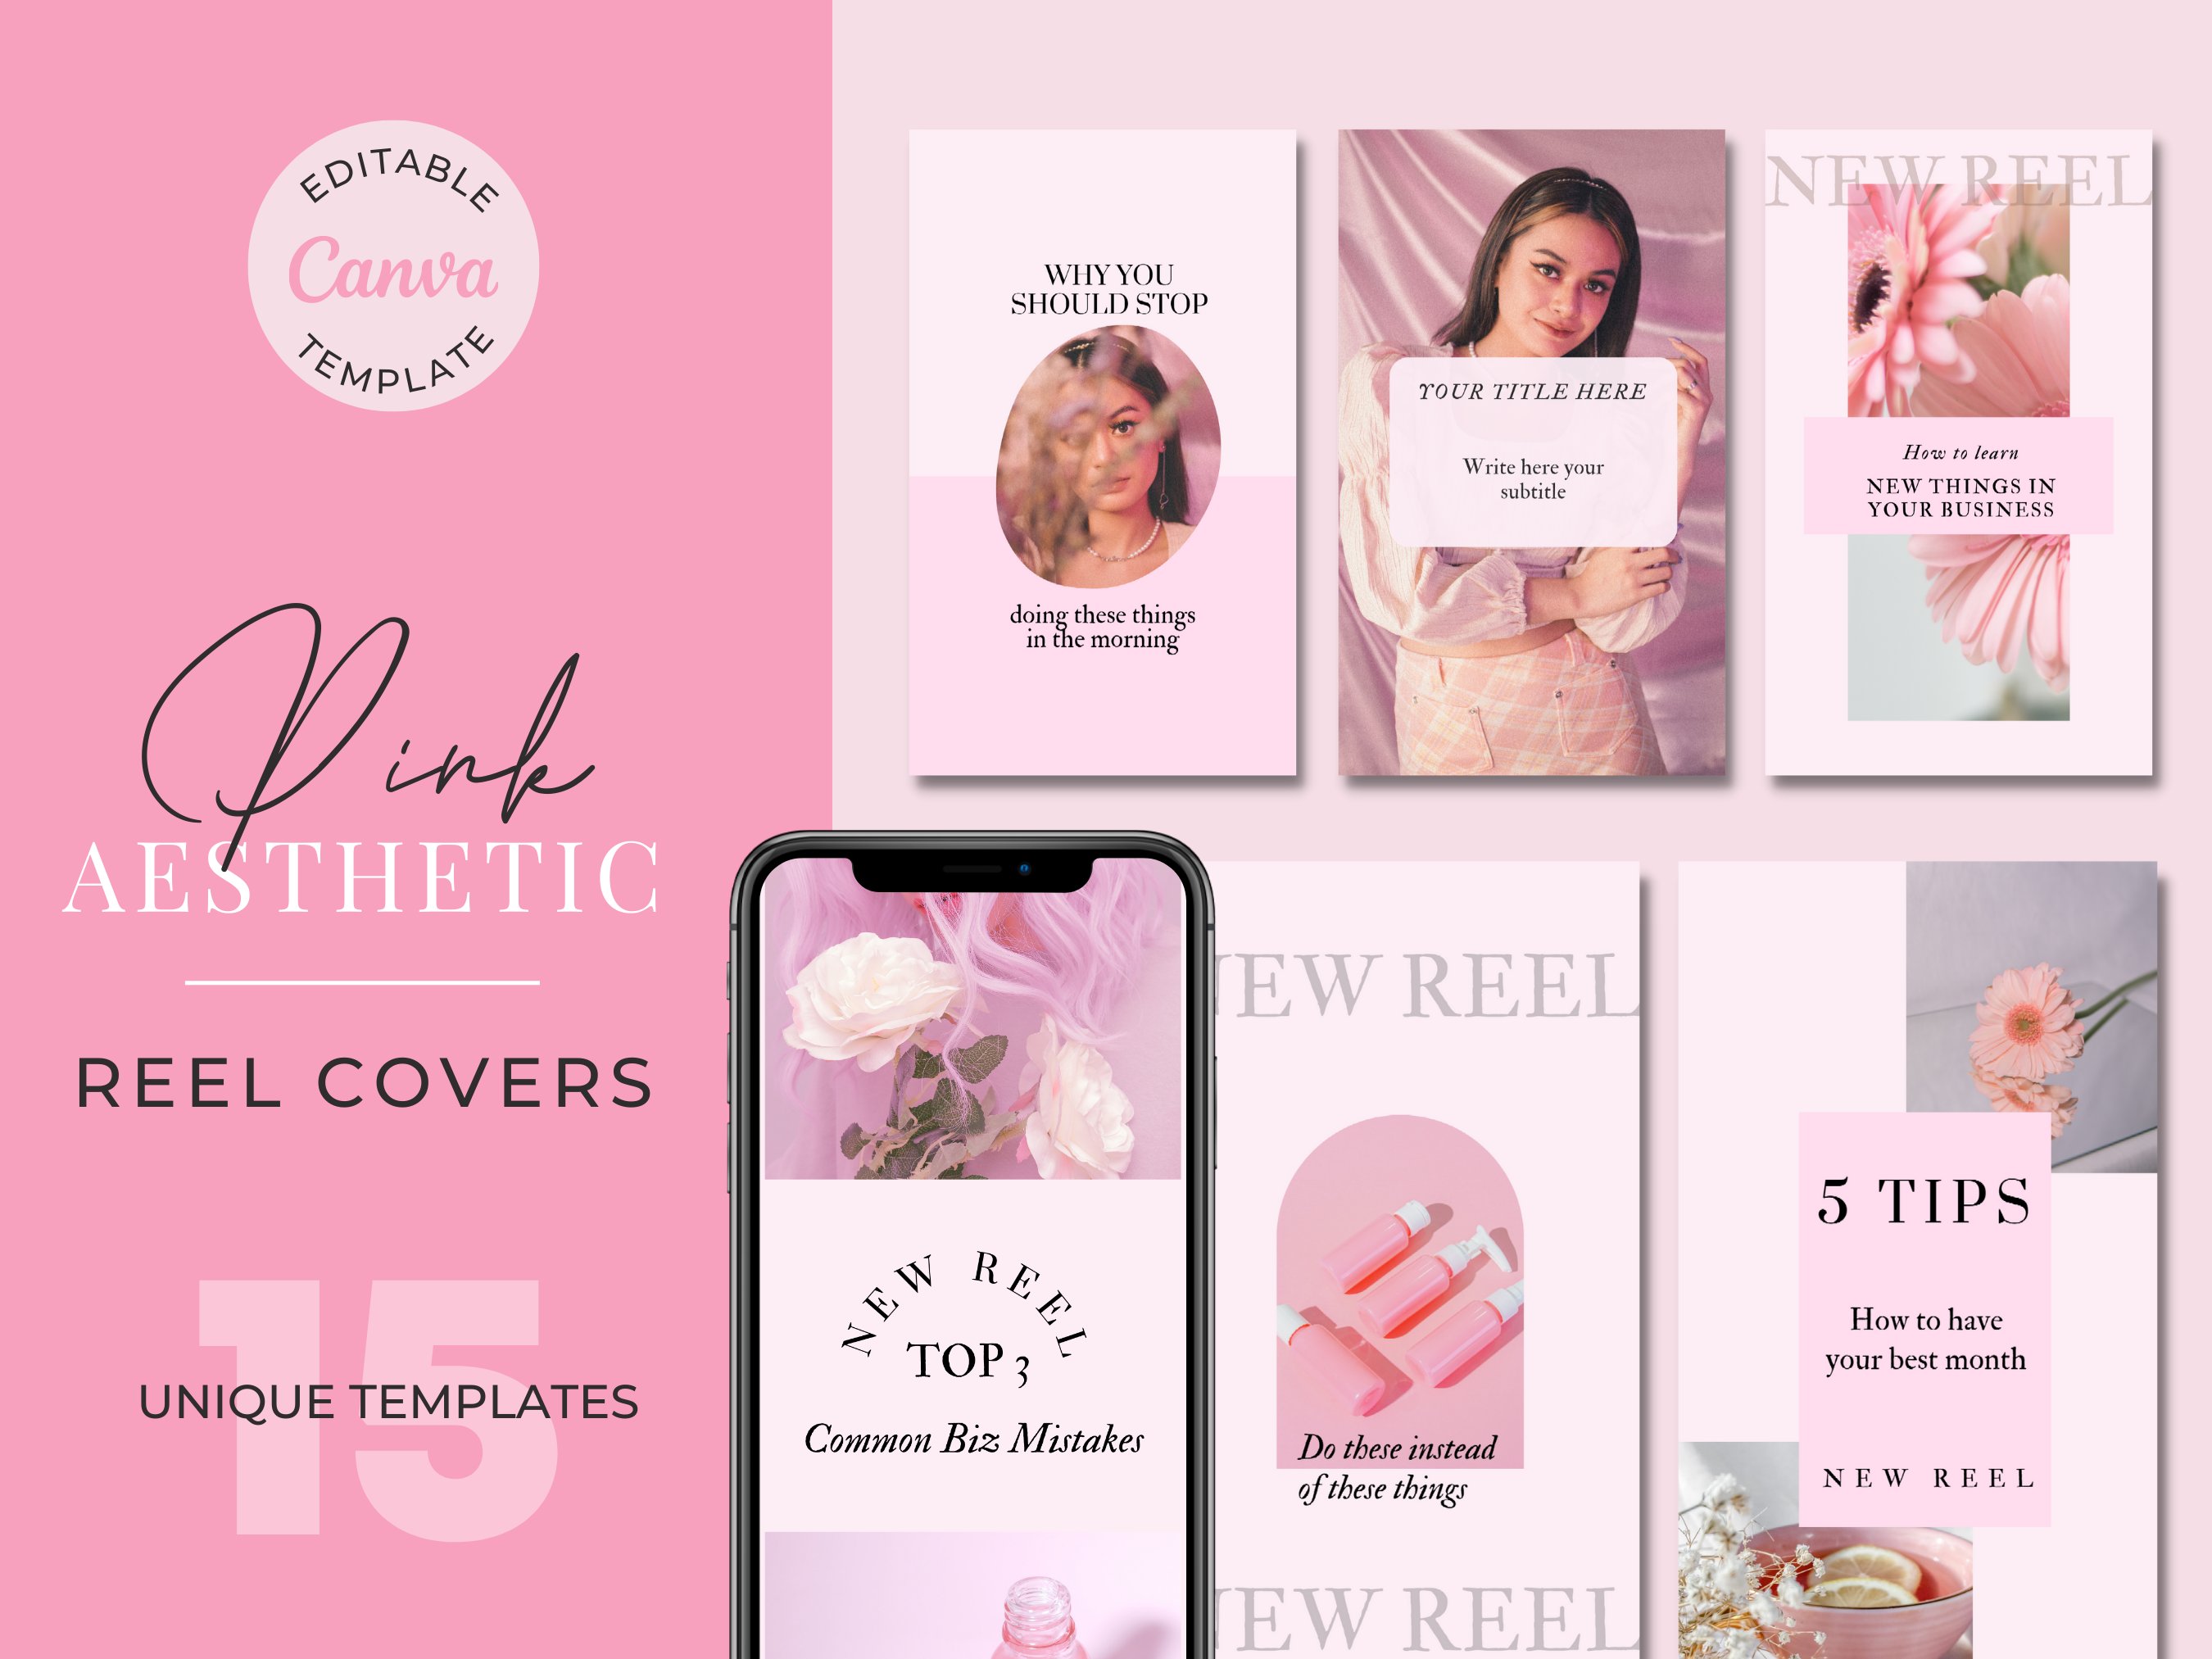 Pink Instagram Reel Covers cover image.